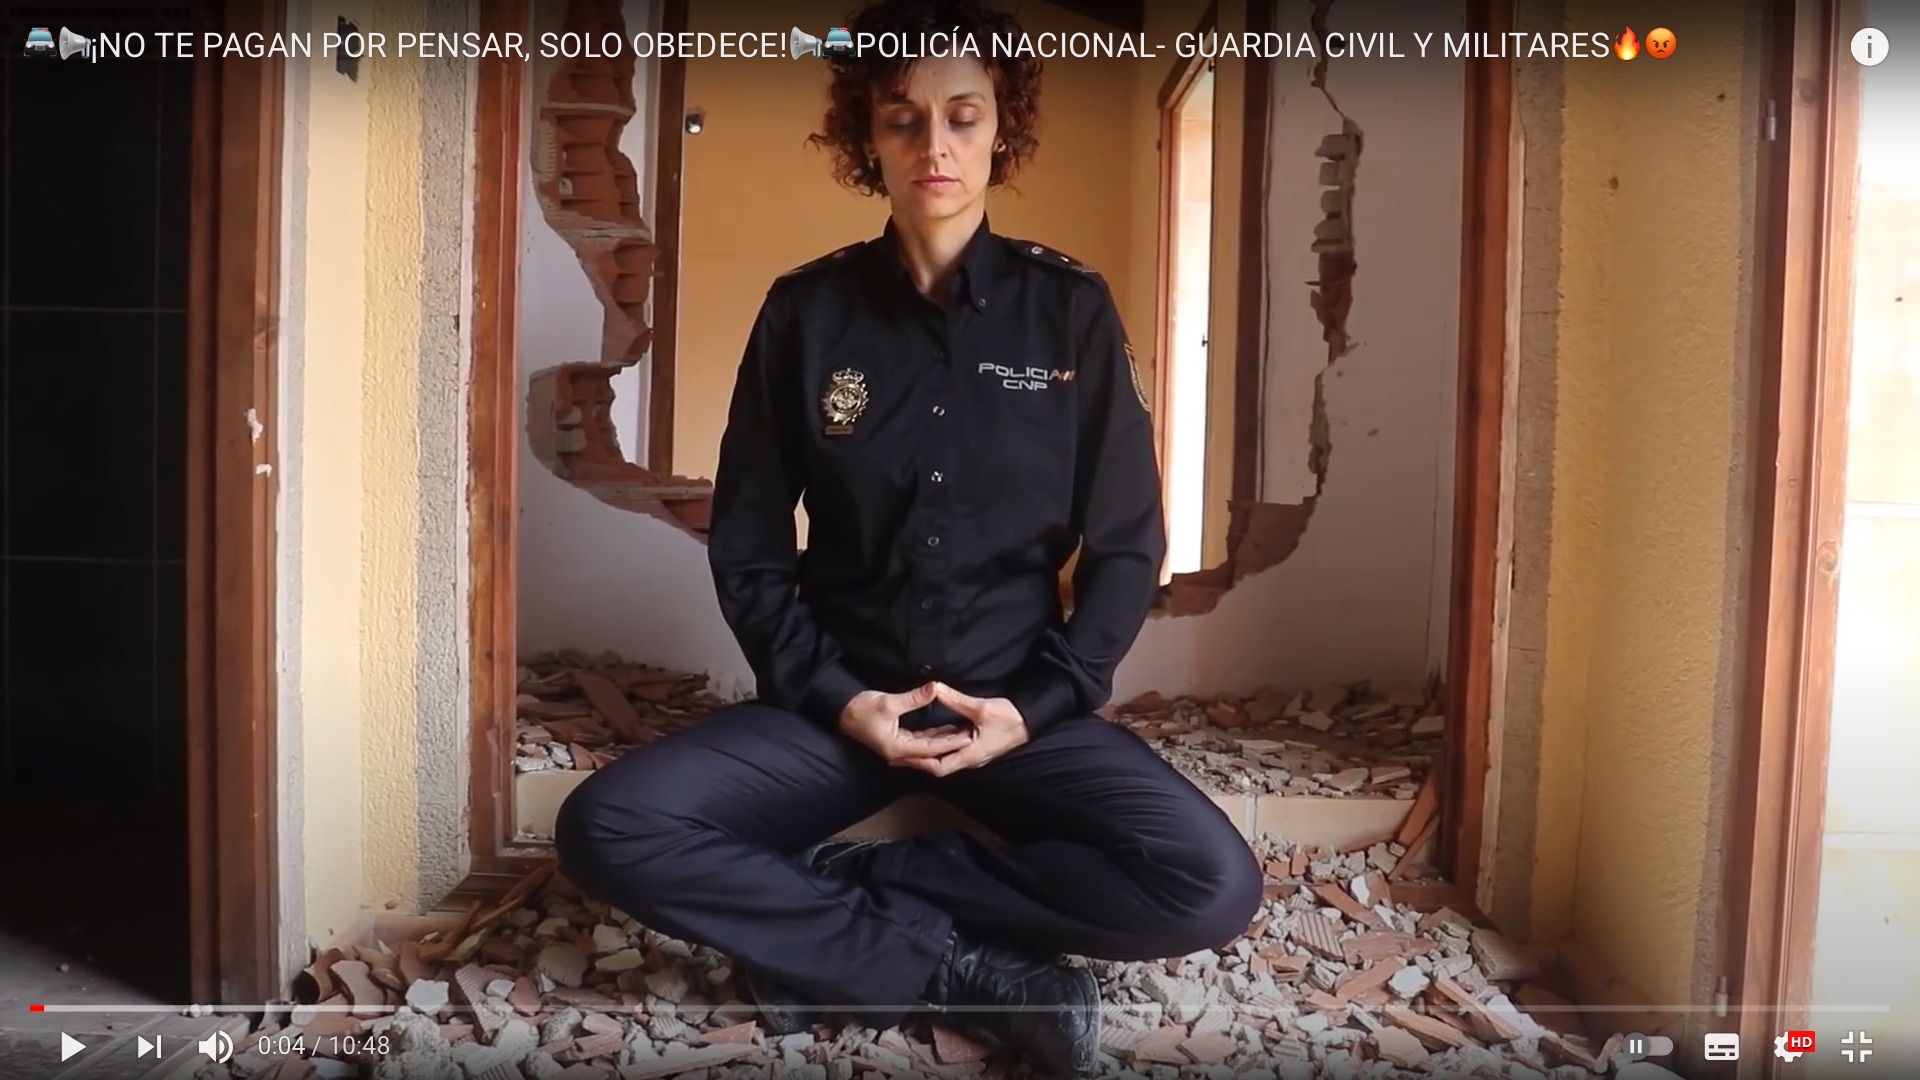 <p>A Spanish police officer meditating against the government in a YouTube video entitled 'They don’t pay you to think', published on 31 August 2020. Source: youtu.be/pylwQ950zmA</p>